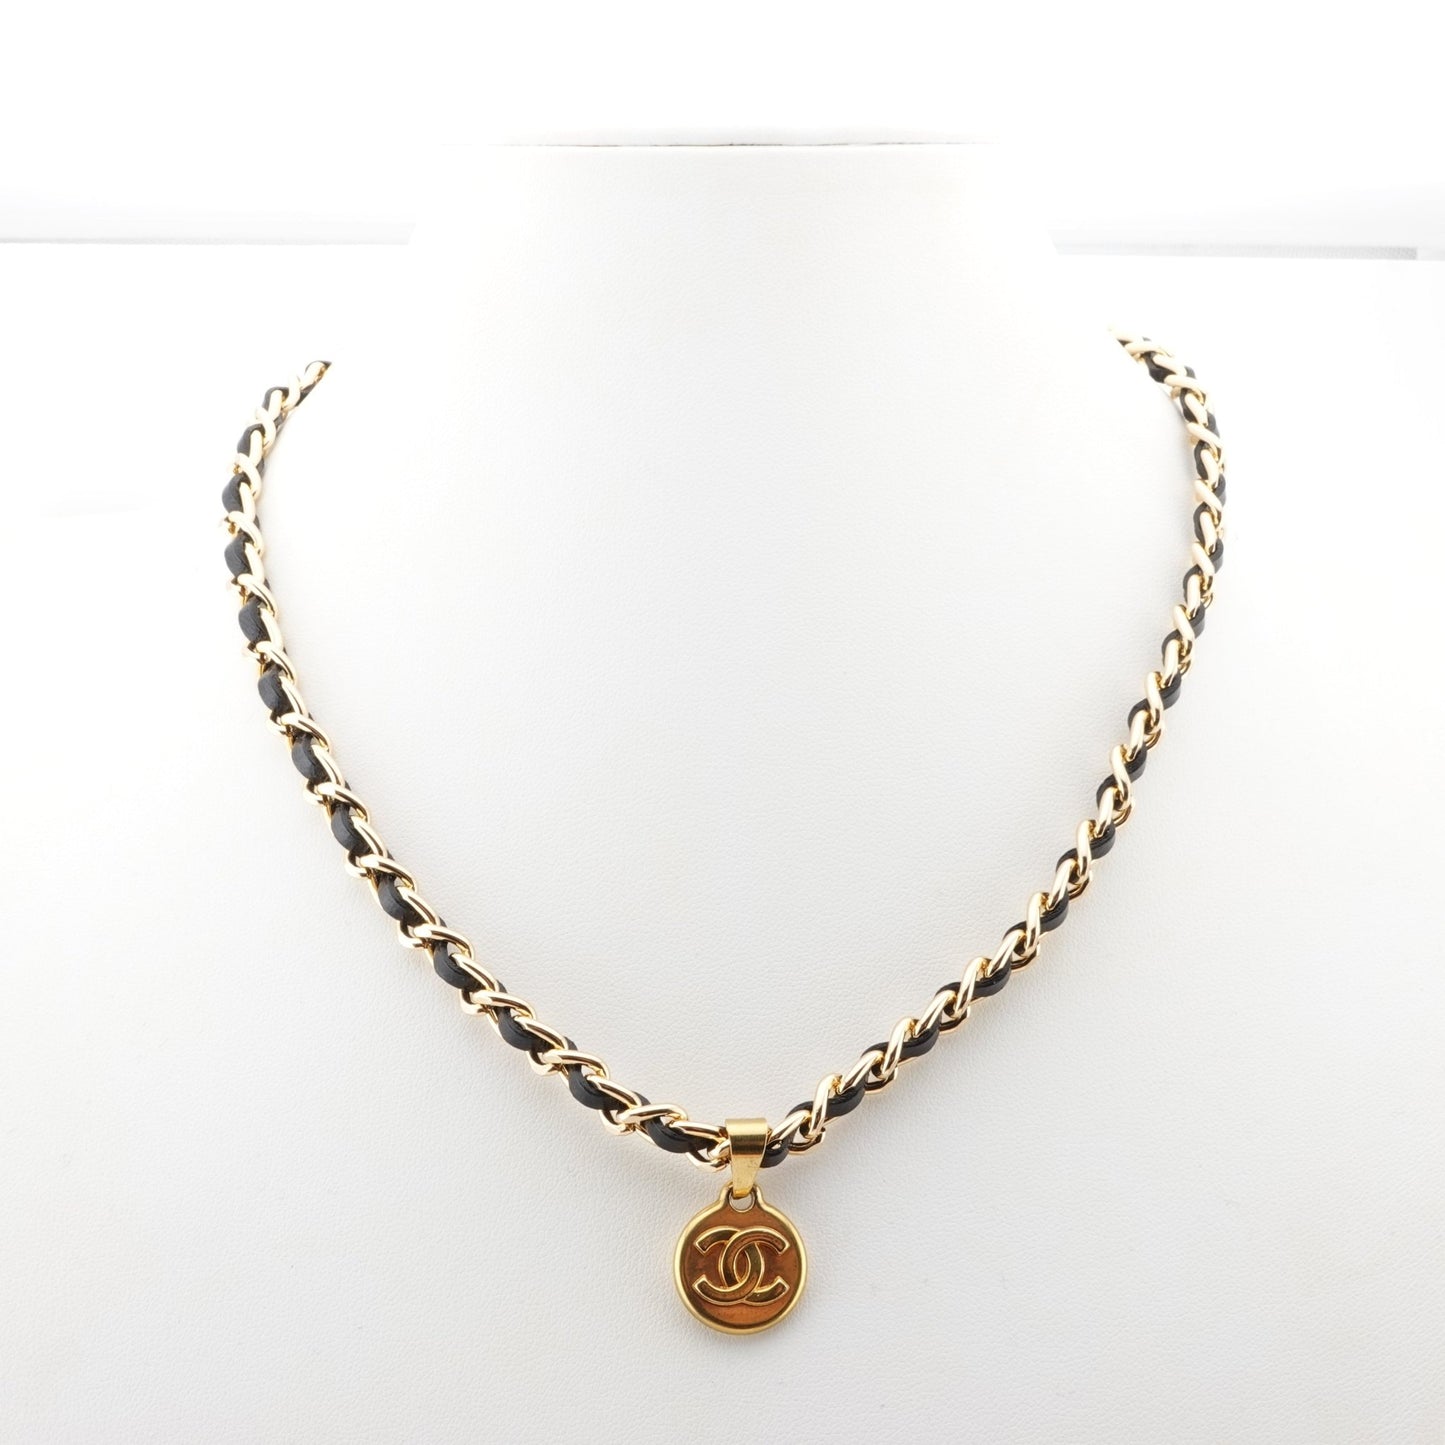 CHANEL Gold CC Logo Charm on Leather Chain Necklace - Bag Envy